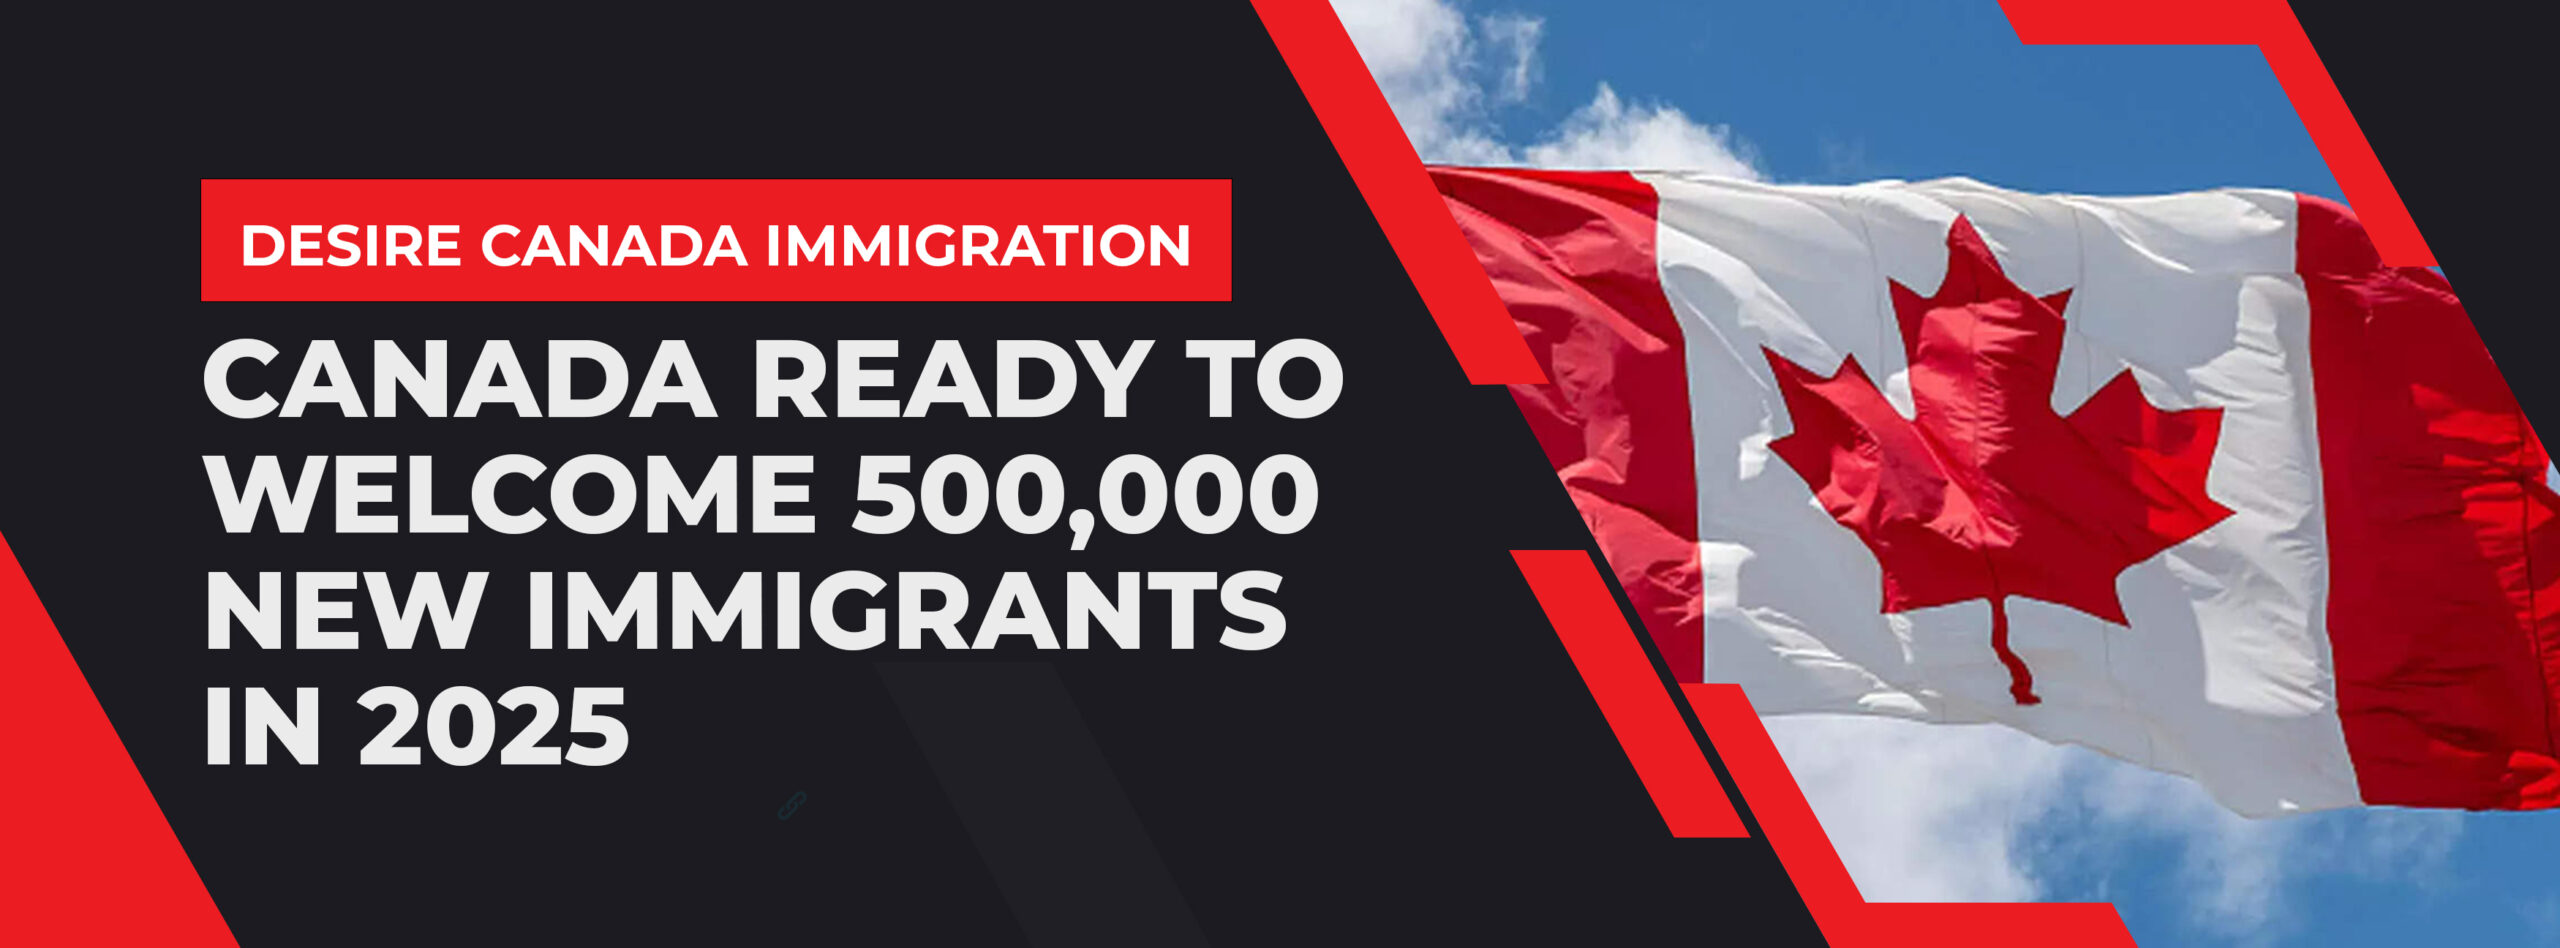 Canada Ready to Welcome 500,000 New Immigrants in 2025